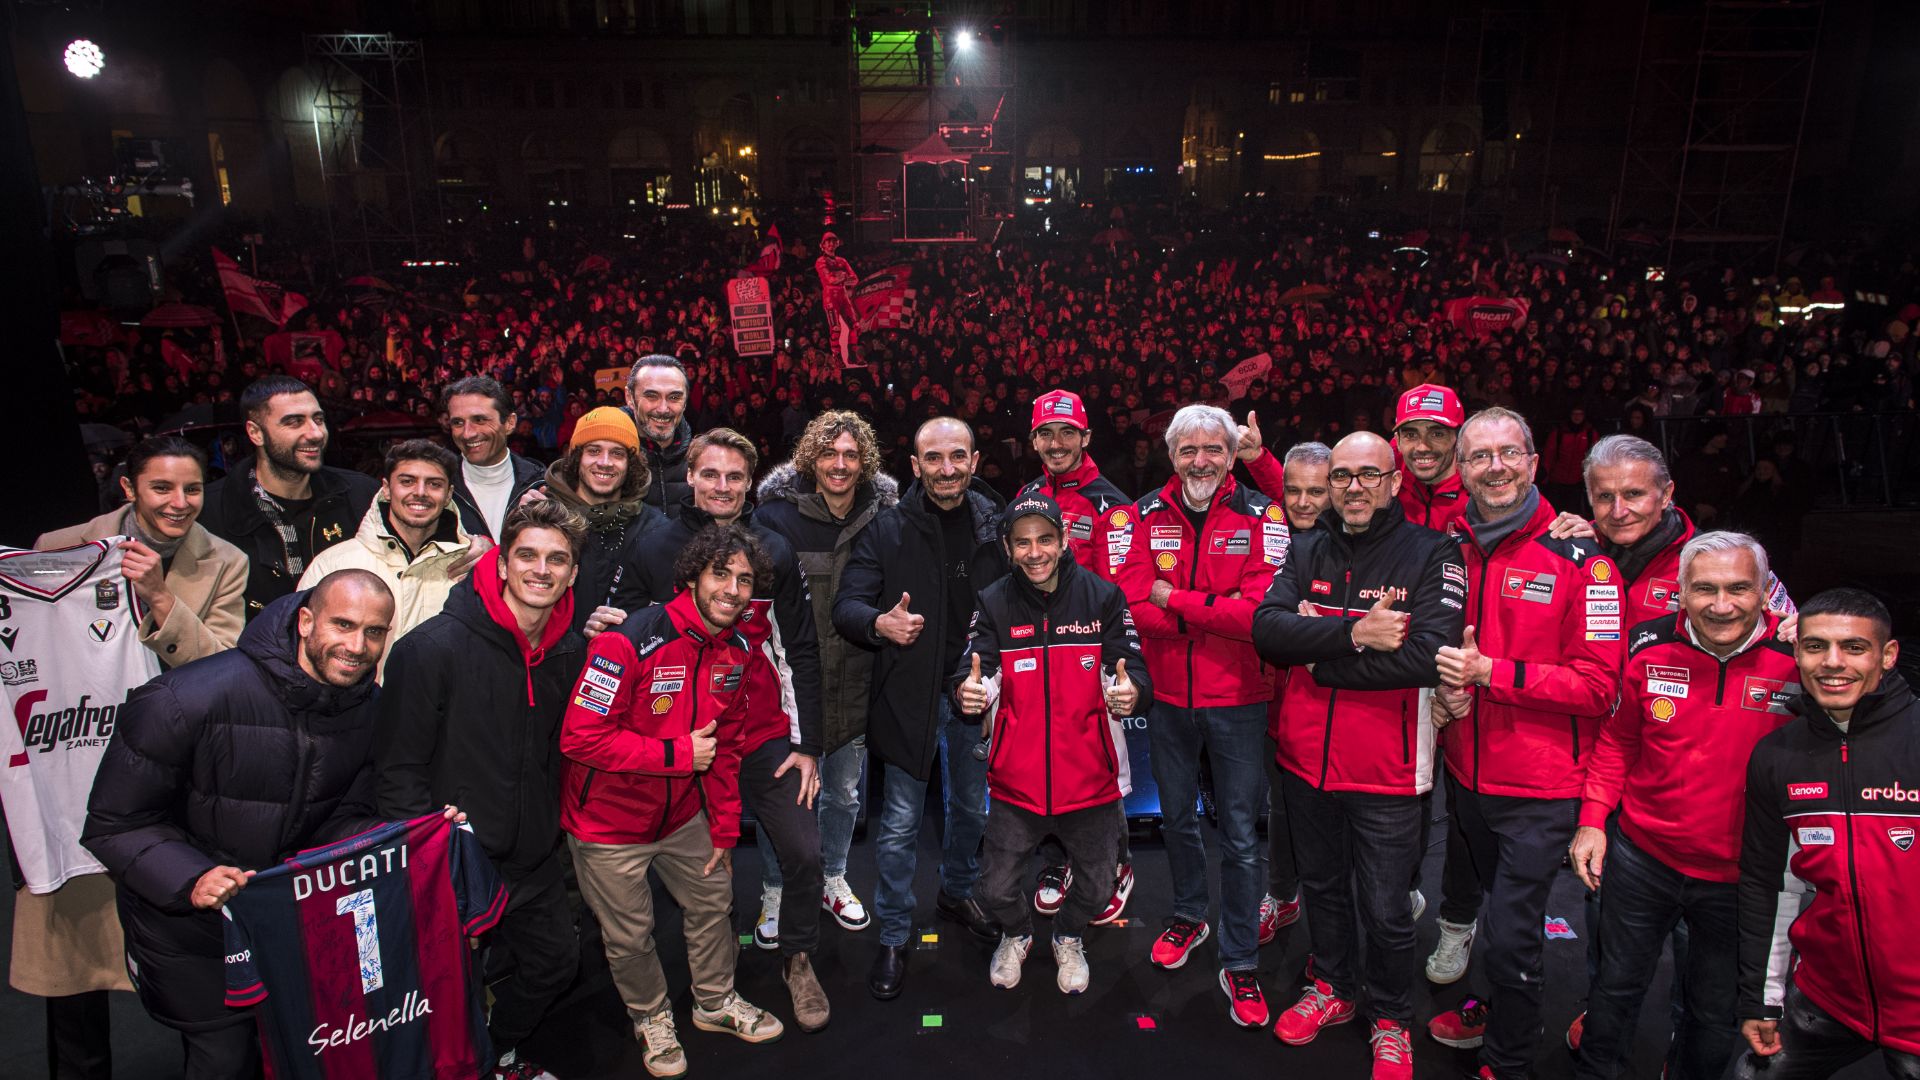 Bologna and Piazza Maggiore turn red to celebrate Ducati's unforgettable racing year.